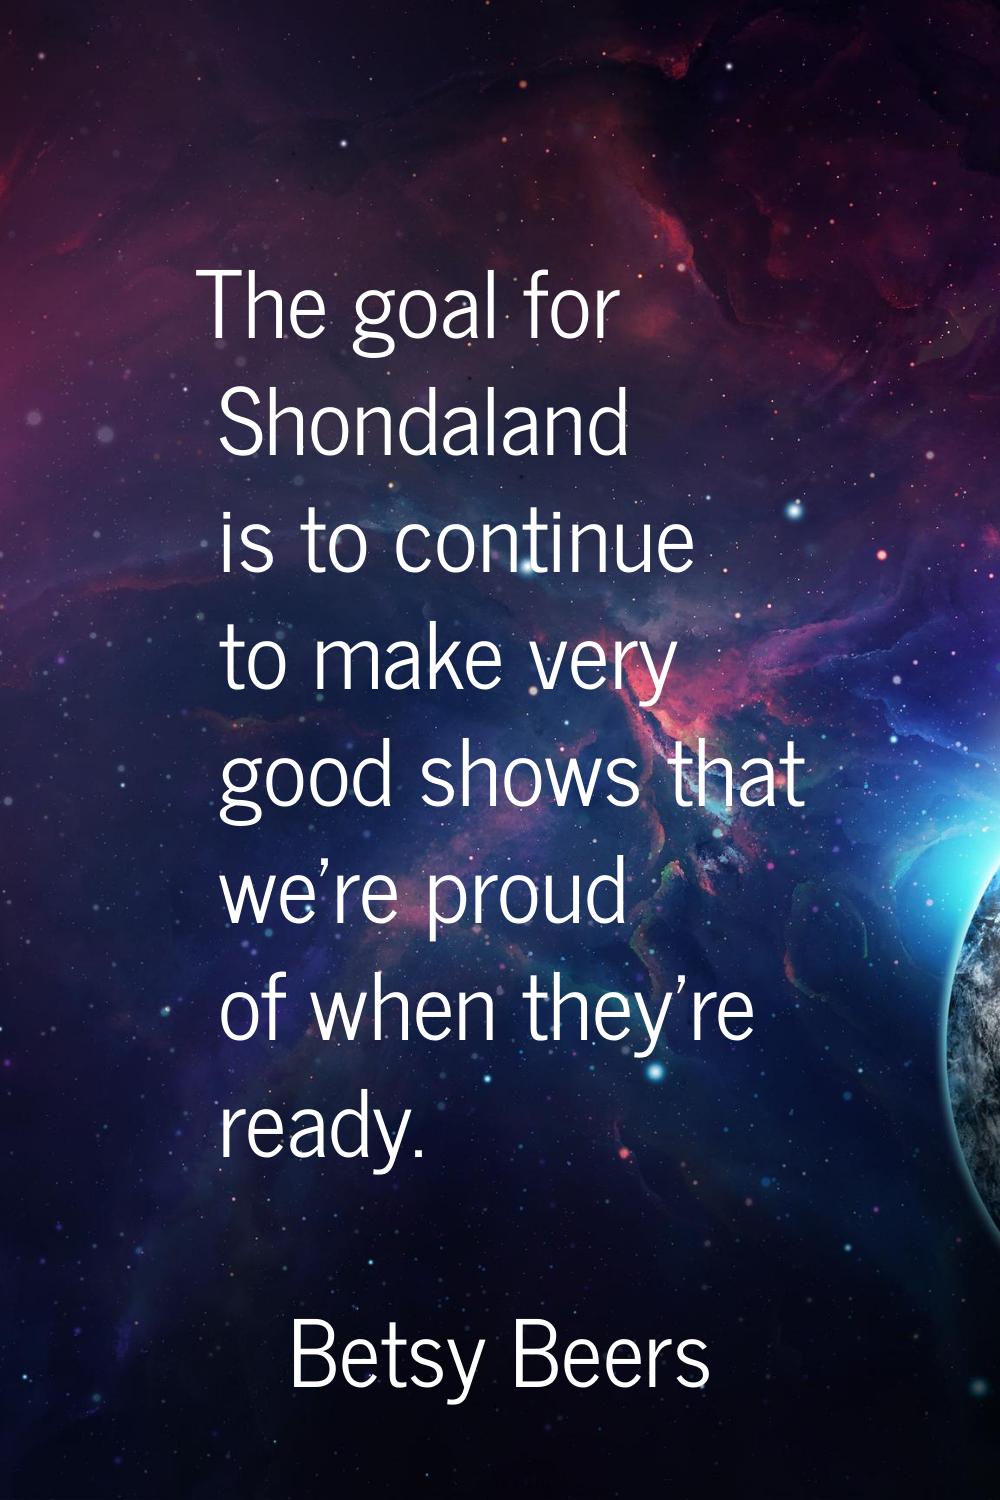 The goal for Shondaland is to continue to make very good shows that we're proud of when they're rea